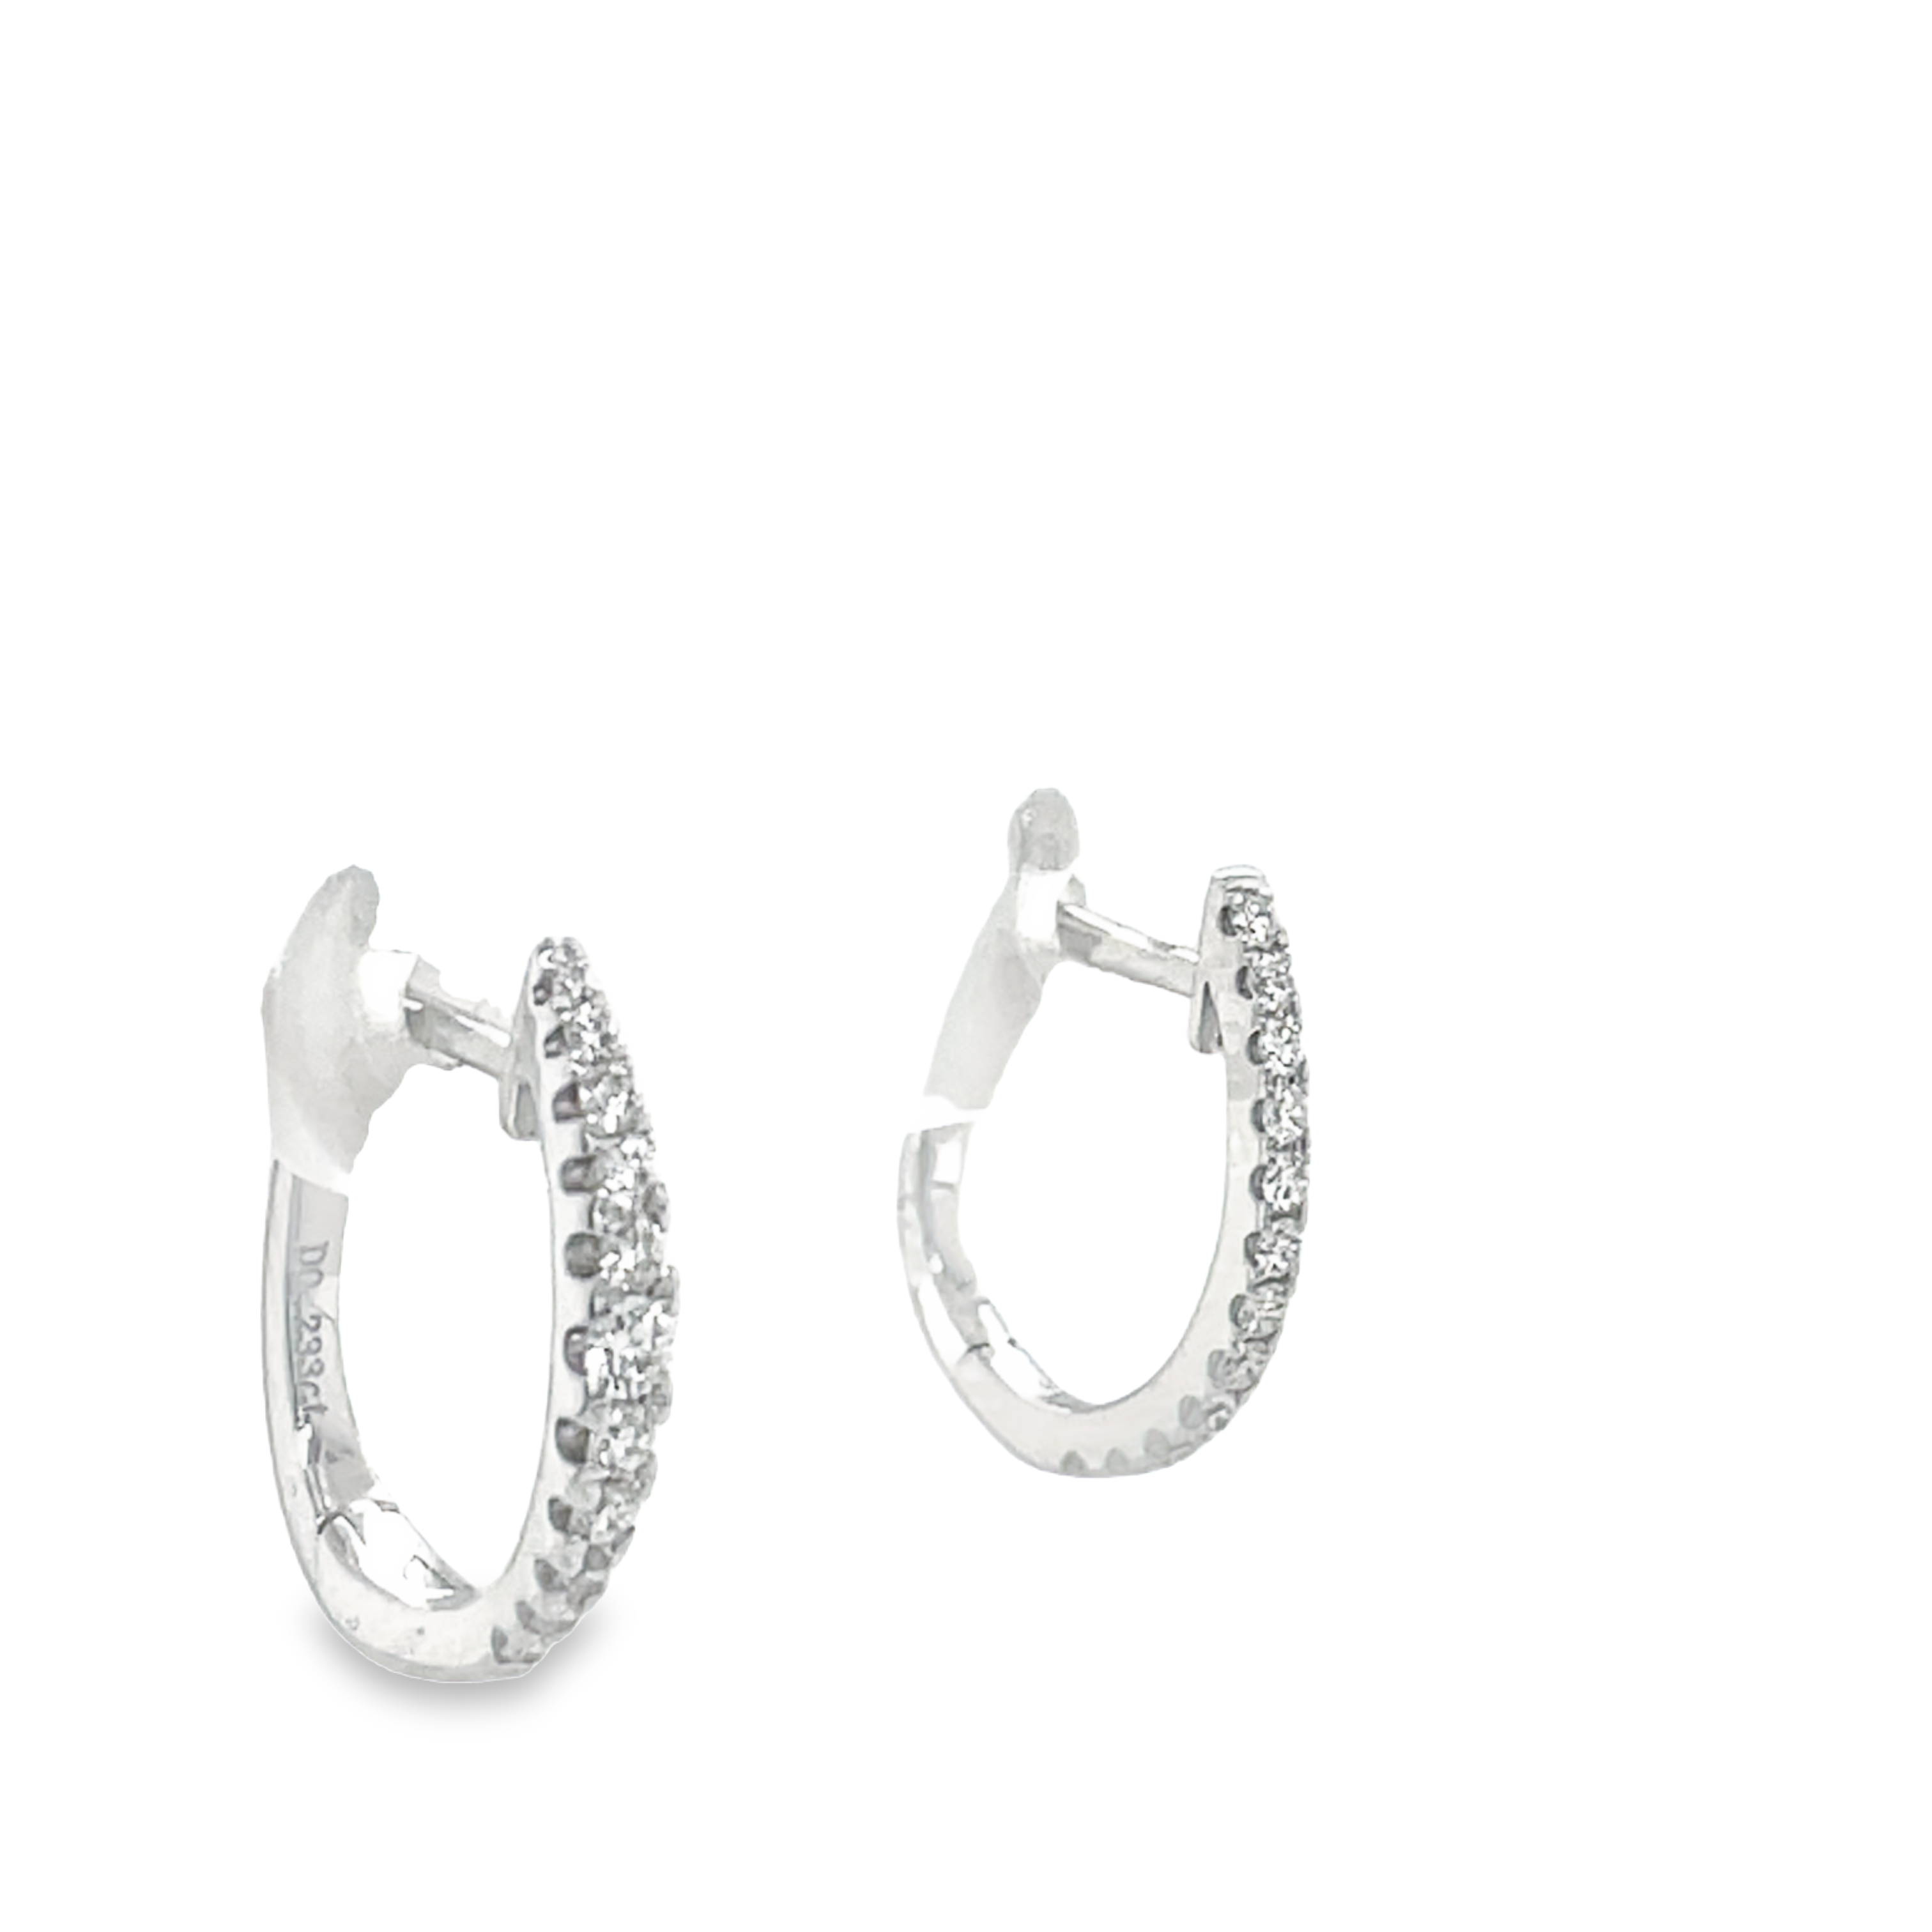 These beautiful Small Diamond Hoop Earrings, crafted from 14k white gold, will make a sophisticated addition to any jewelry collection. The 0.29 ct diamond accents bring subtle sparkle to the delicate hoops. Perfect for everyday elegance!